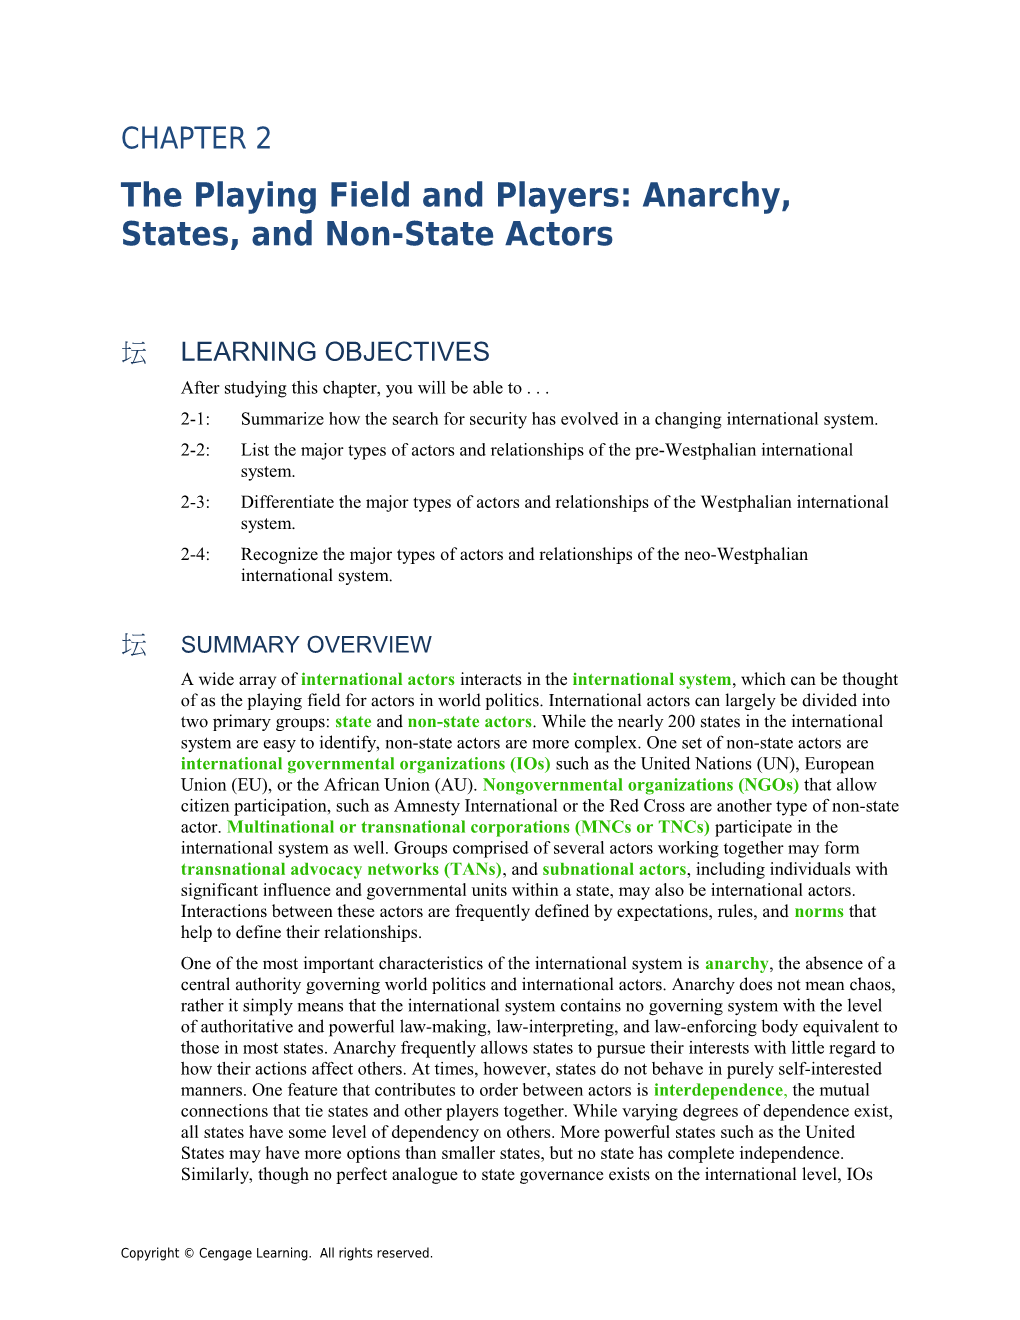 Chapter 2: the Playing Field and Players: Anarchy, States, and Non-State Actors1